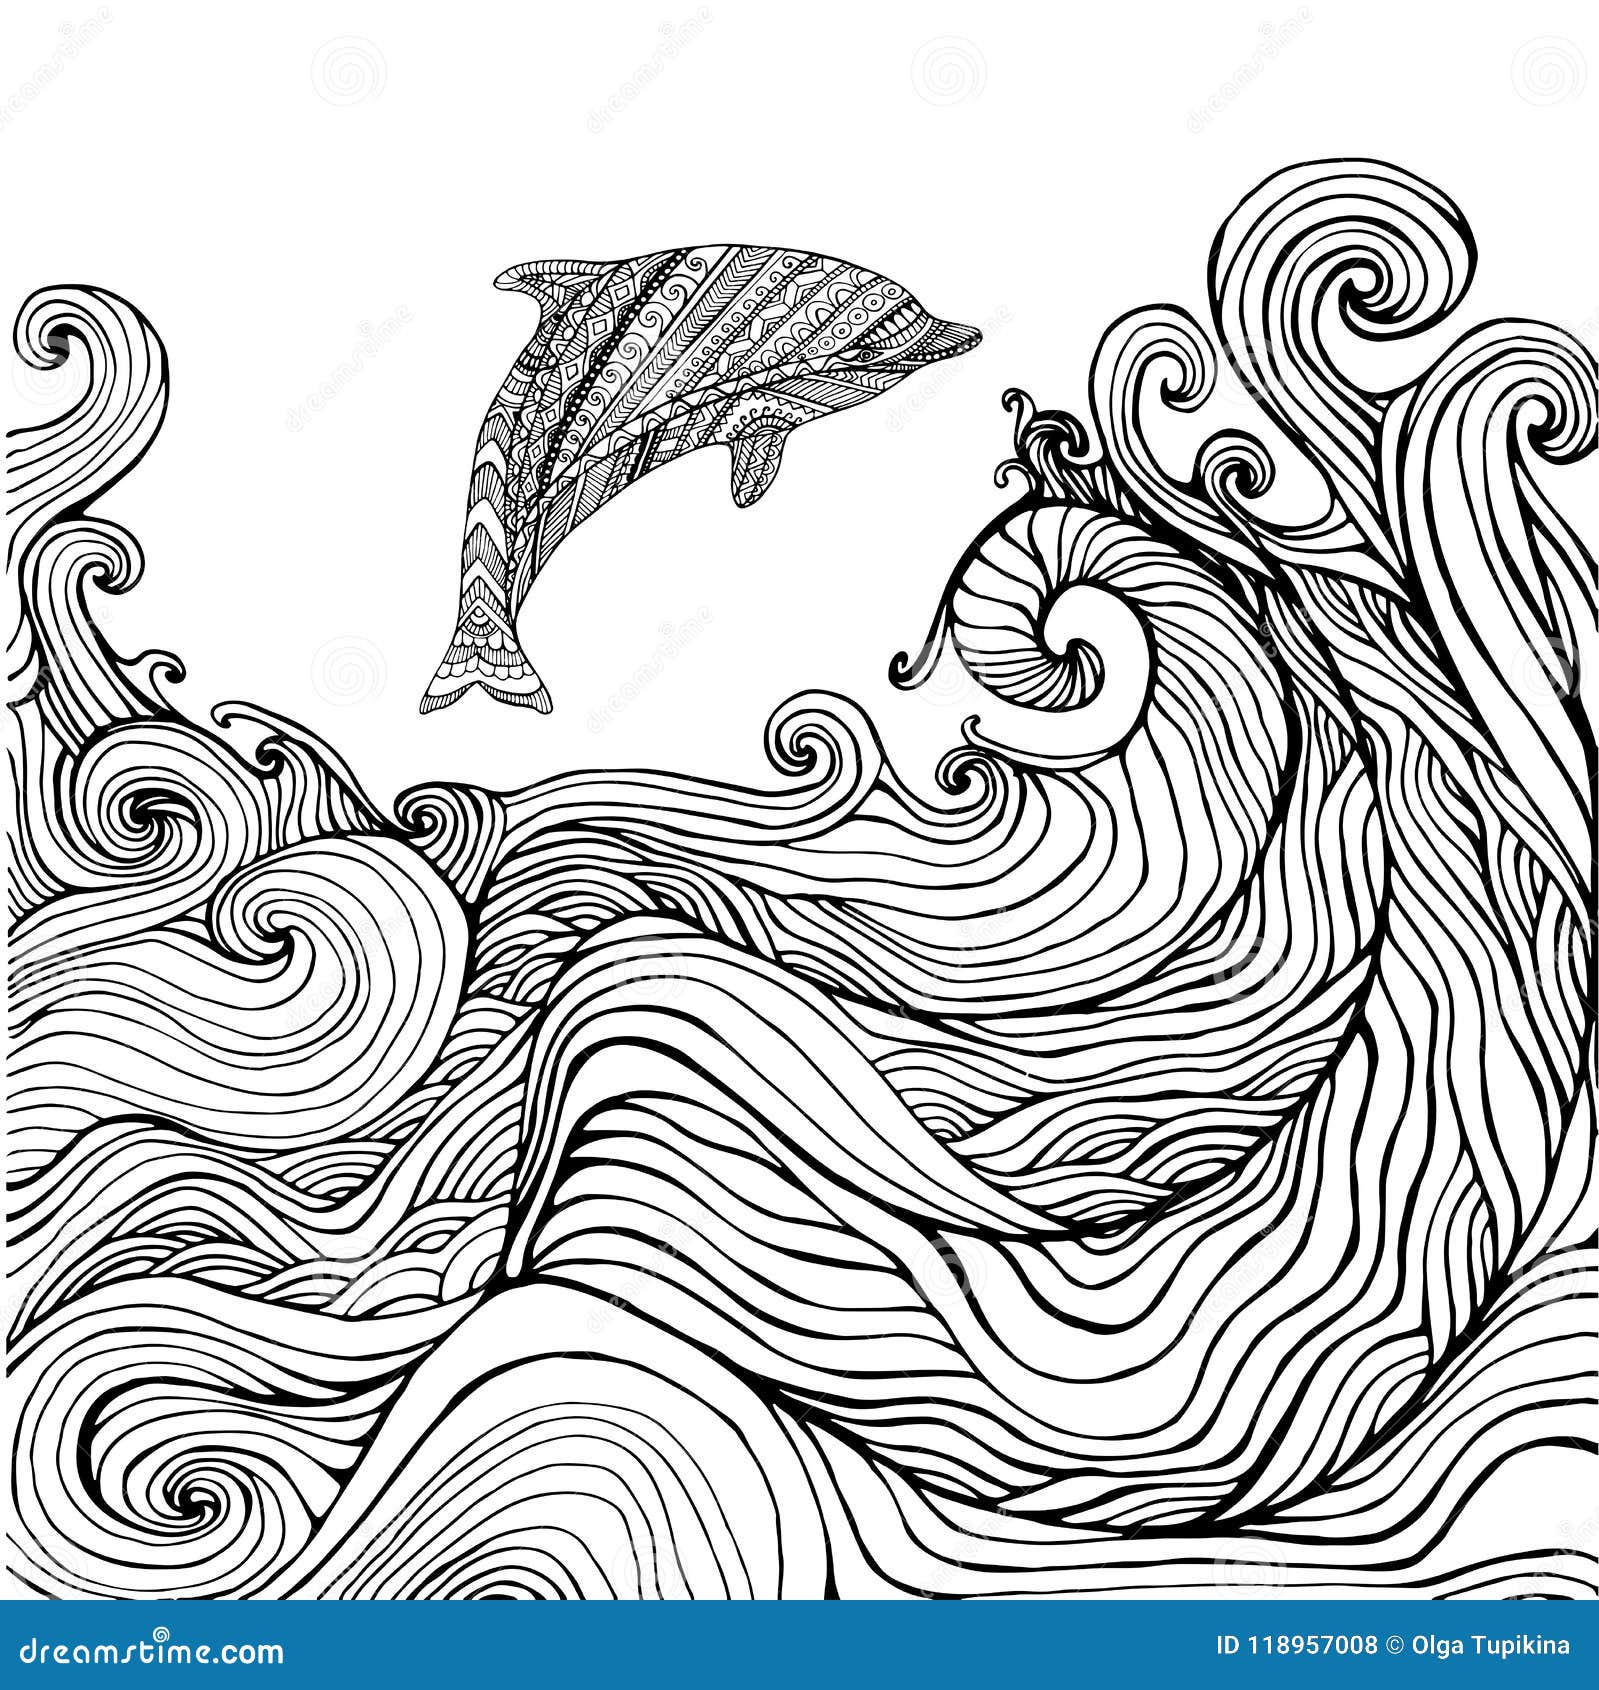 Dolphin and ocean waves coloring page for children and adults stock vector